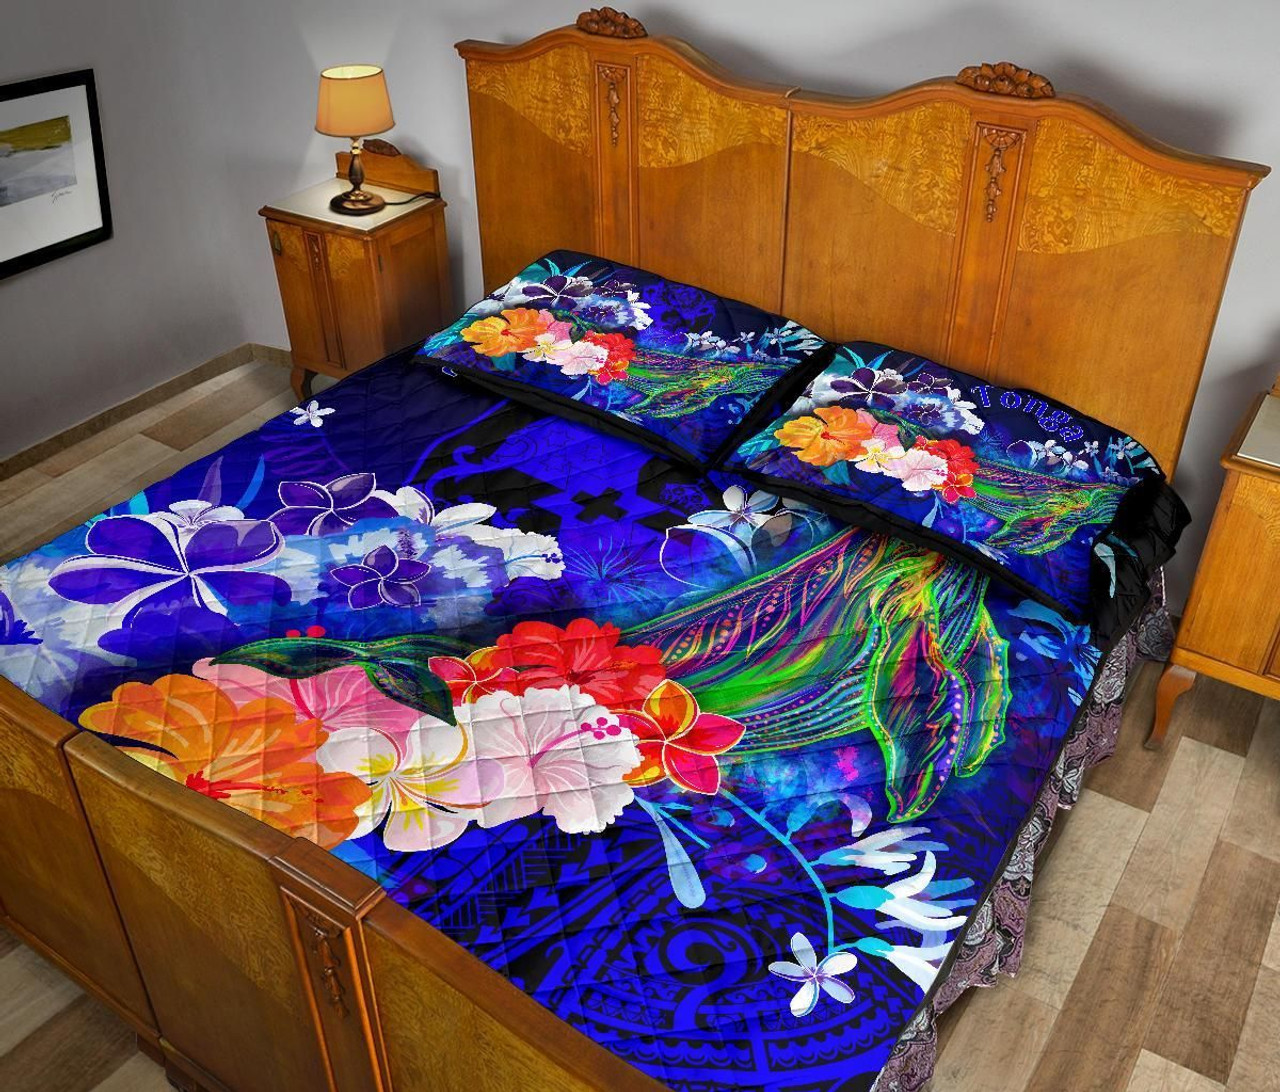 Tonga Quilt Bed Set - Humpback Whale with Tropical Flowers (Blue) 4